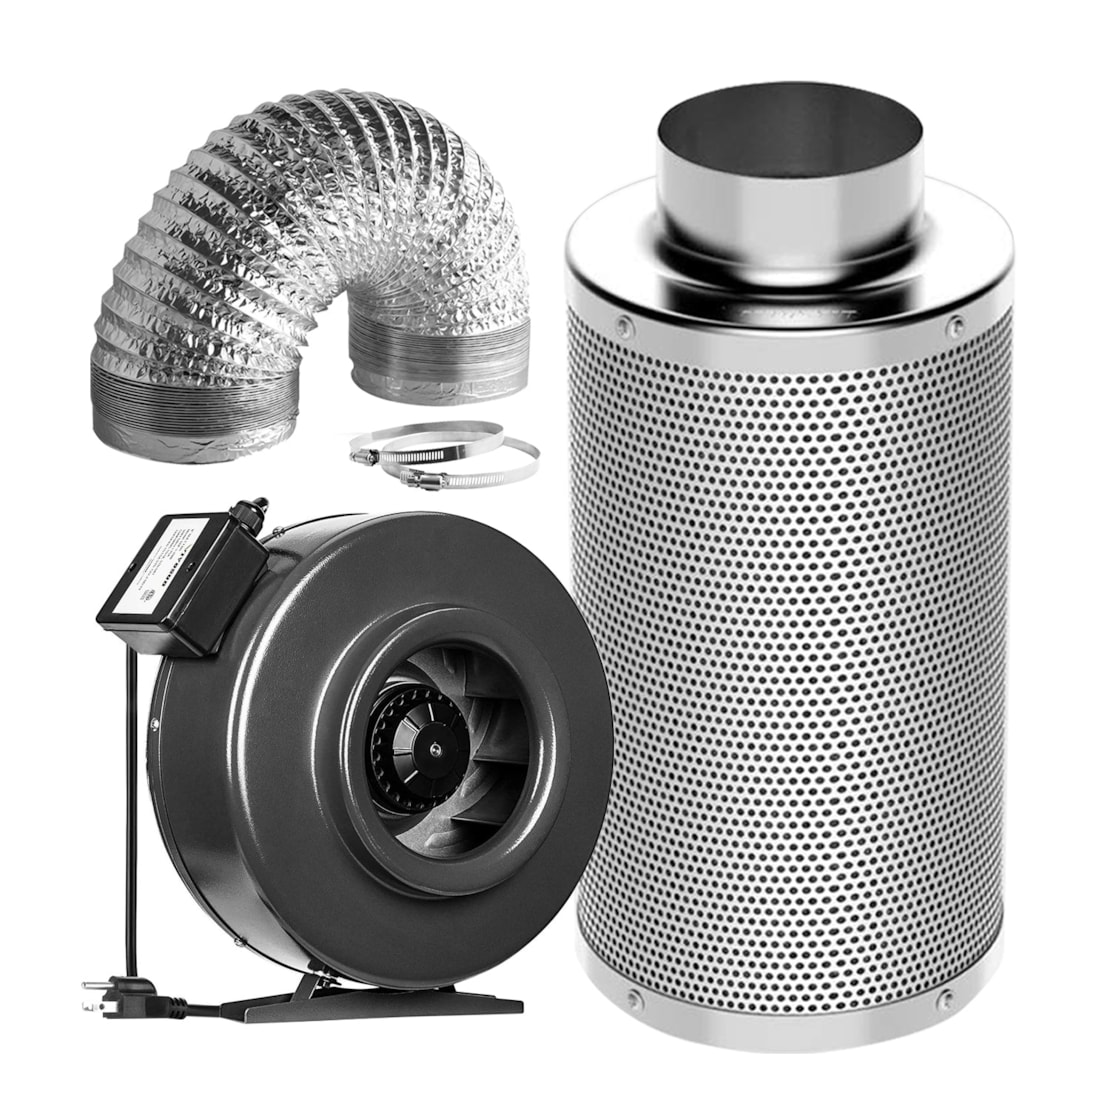 VIVOSUN 6-Inch 440 CFM Inline Duct Fan Kit with Carbon Filter and Ducting